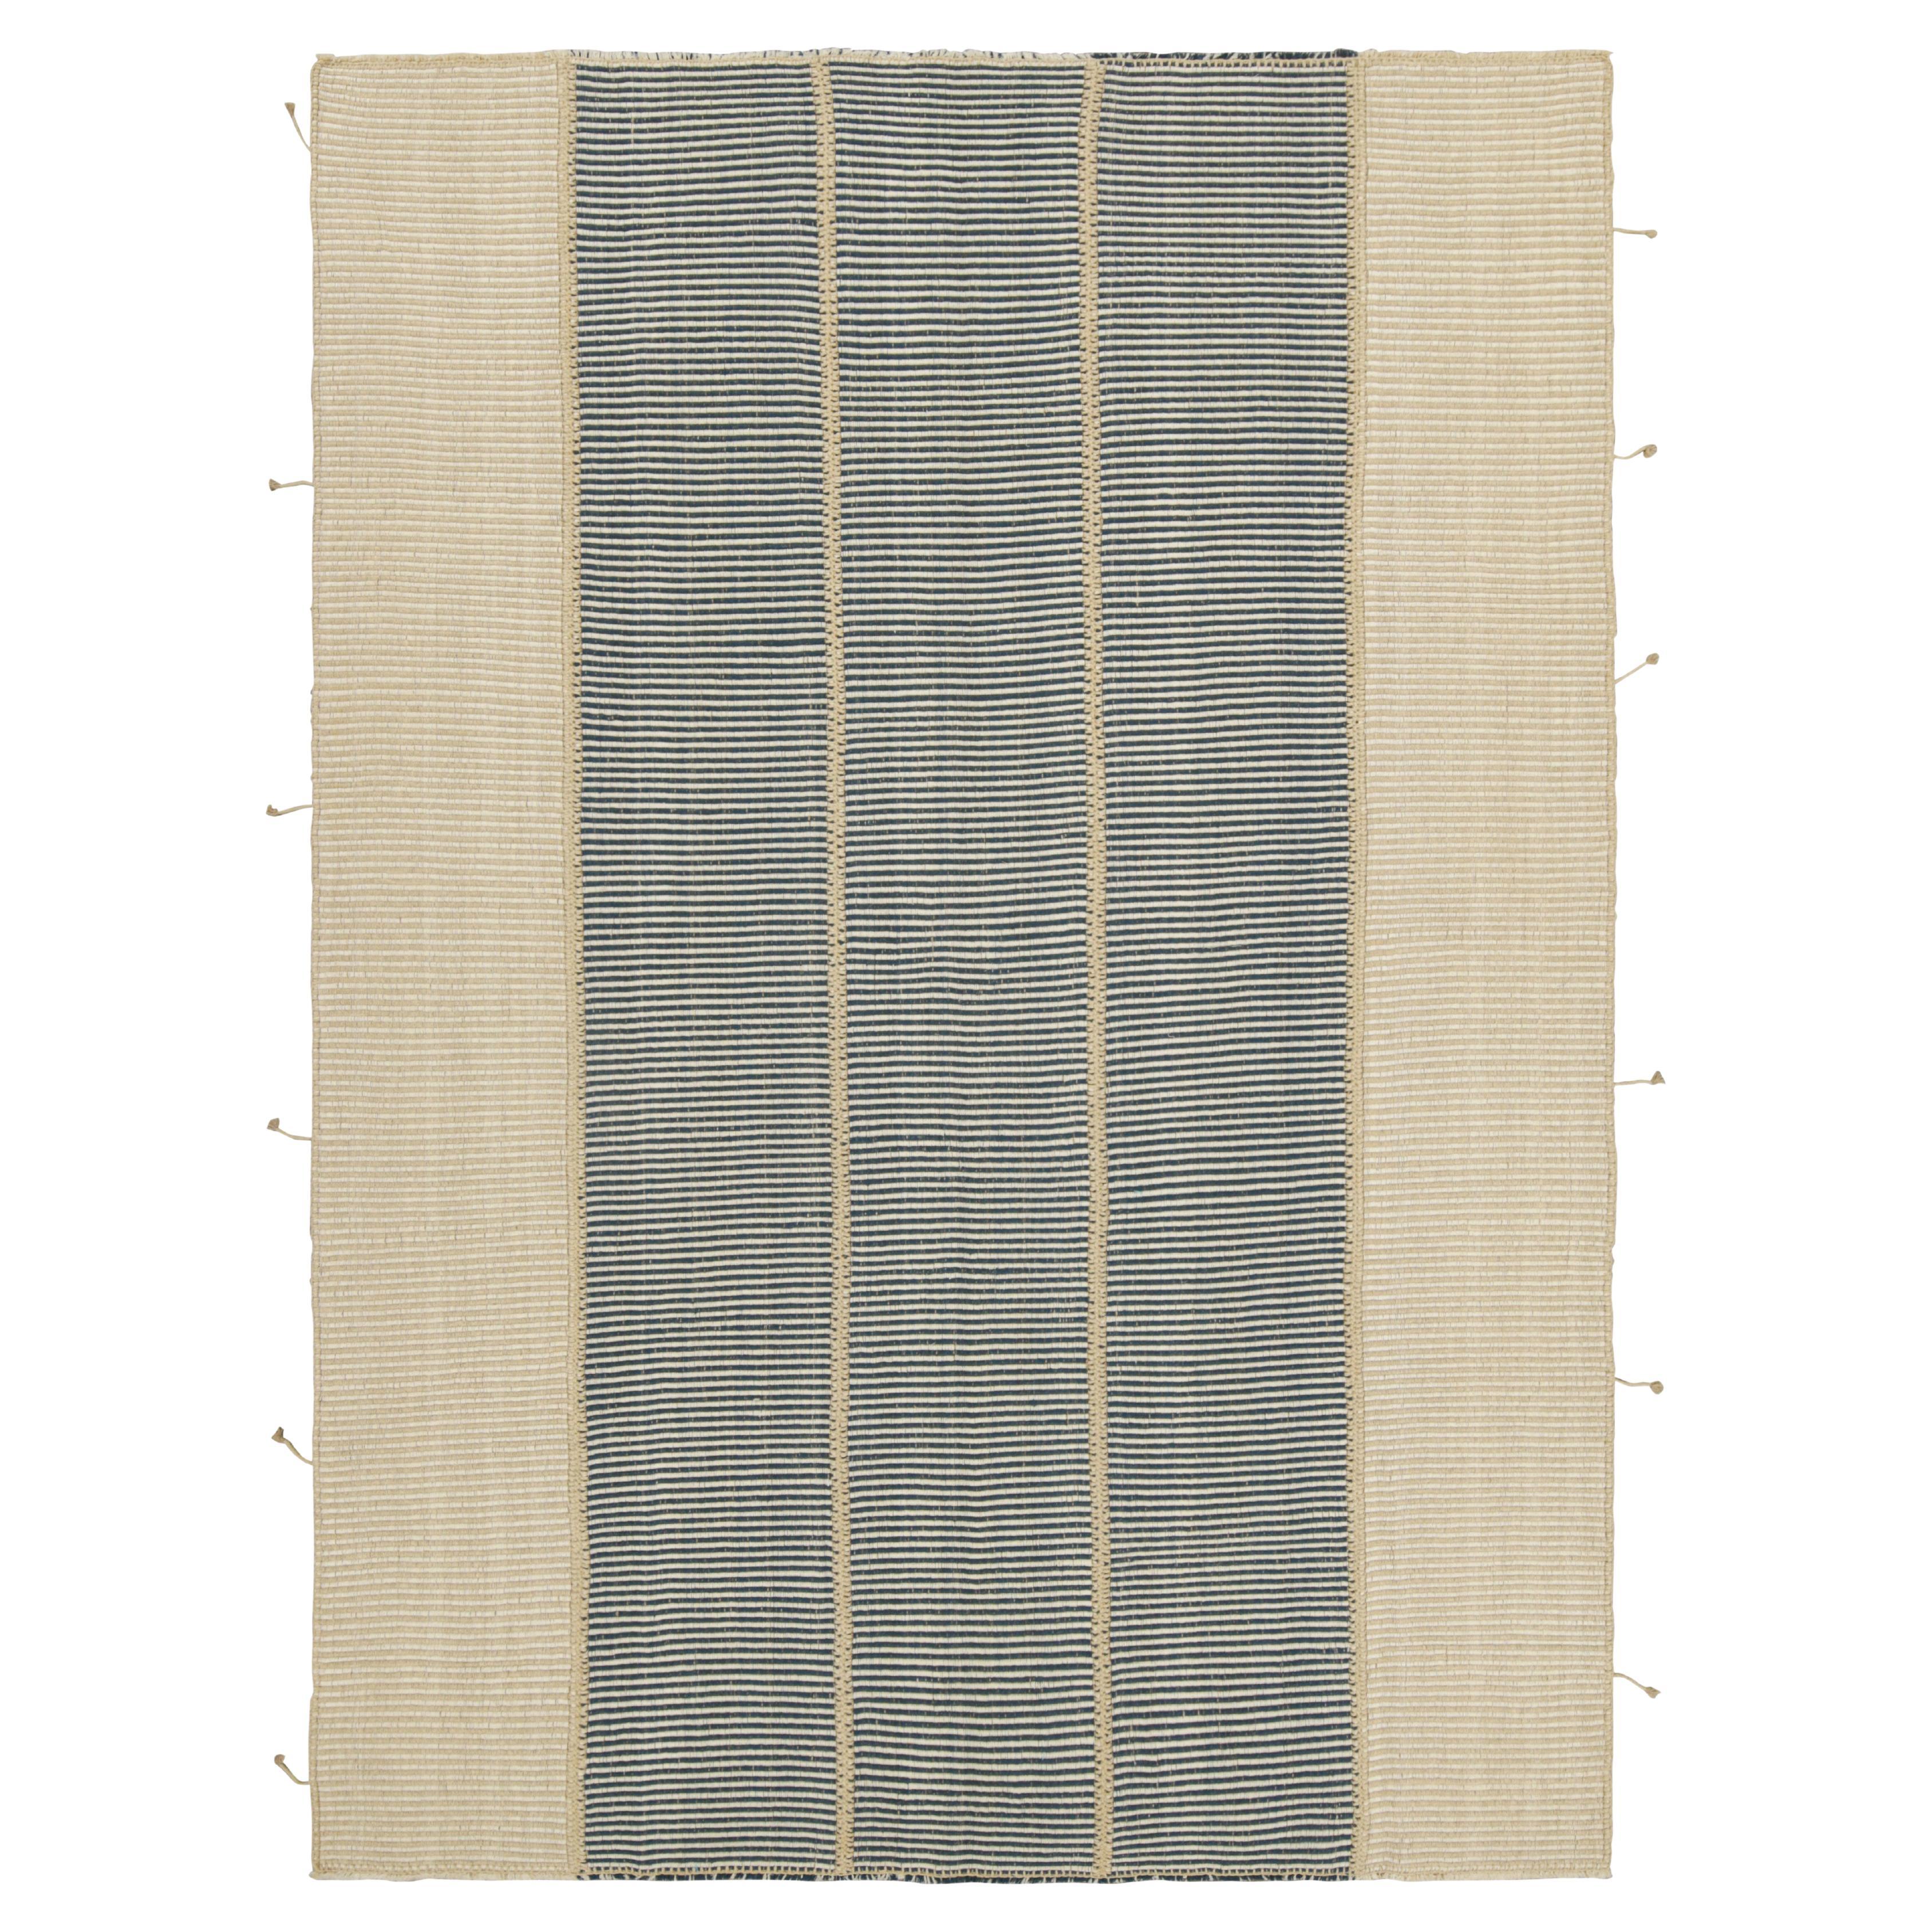 Rug & Kilim’s Contemporary Kilim in Beige and Blue Textural Stripes For Sale